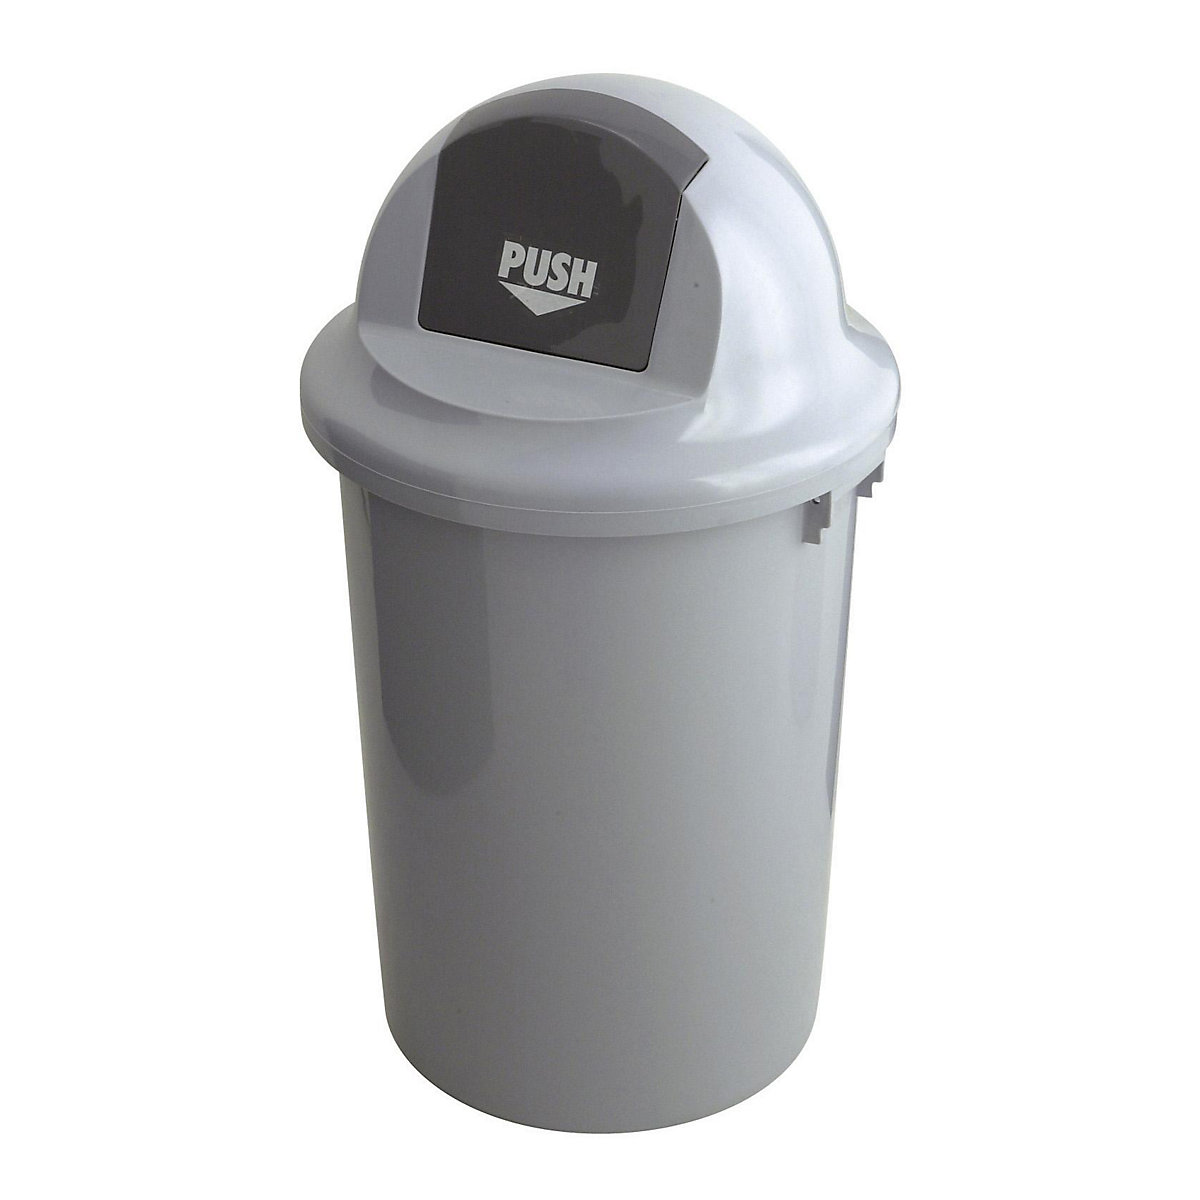 Waste collector with push lid